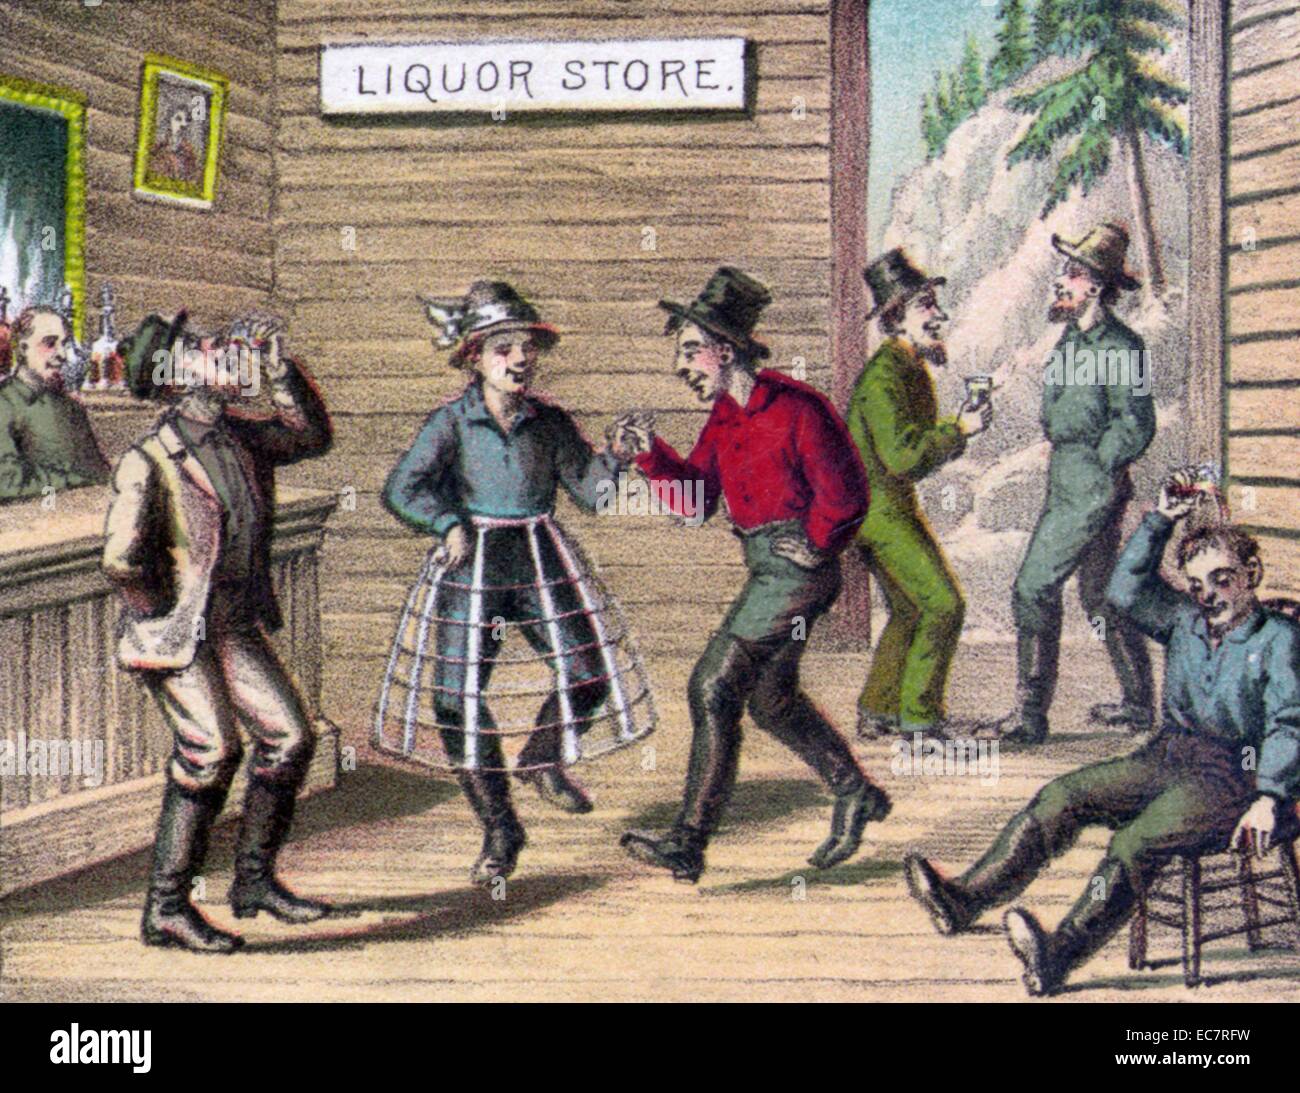 American liquor store or bar in 1850's Stock Photo